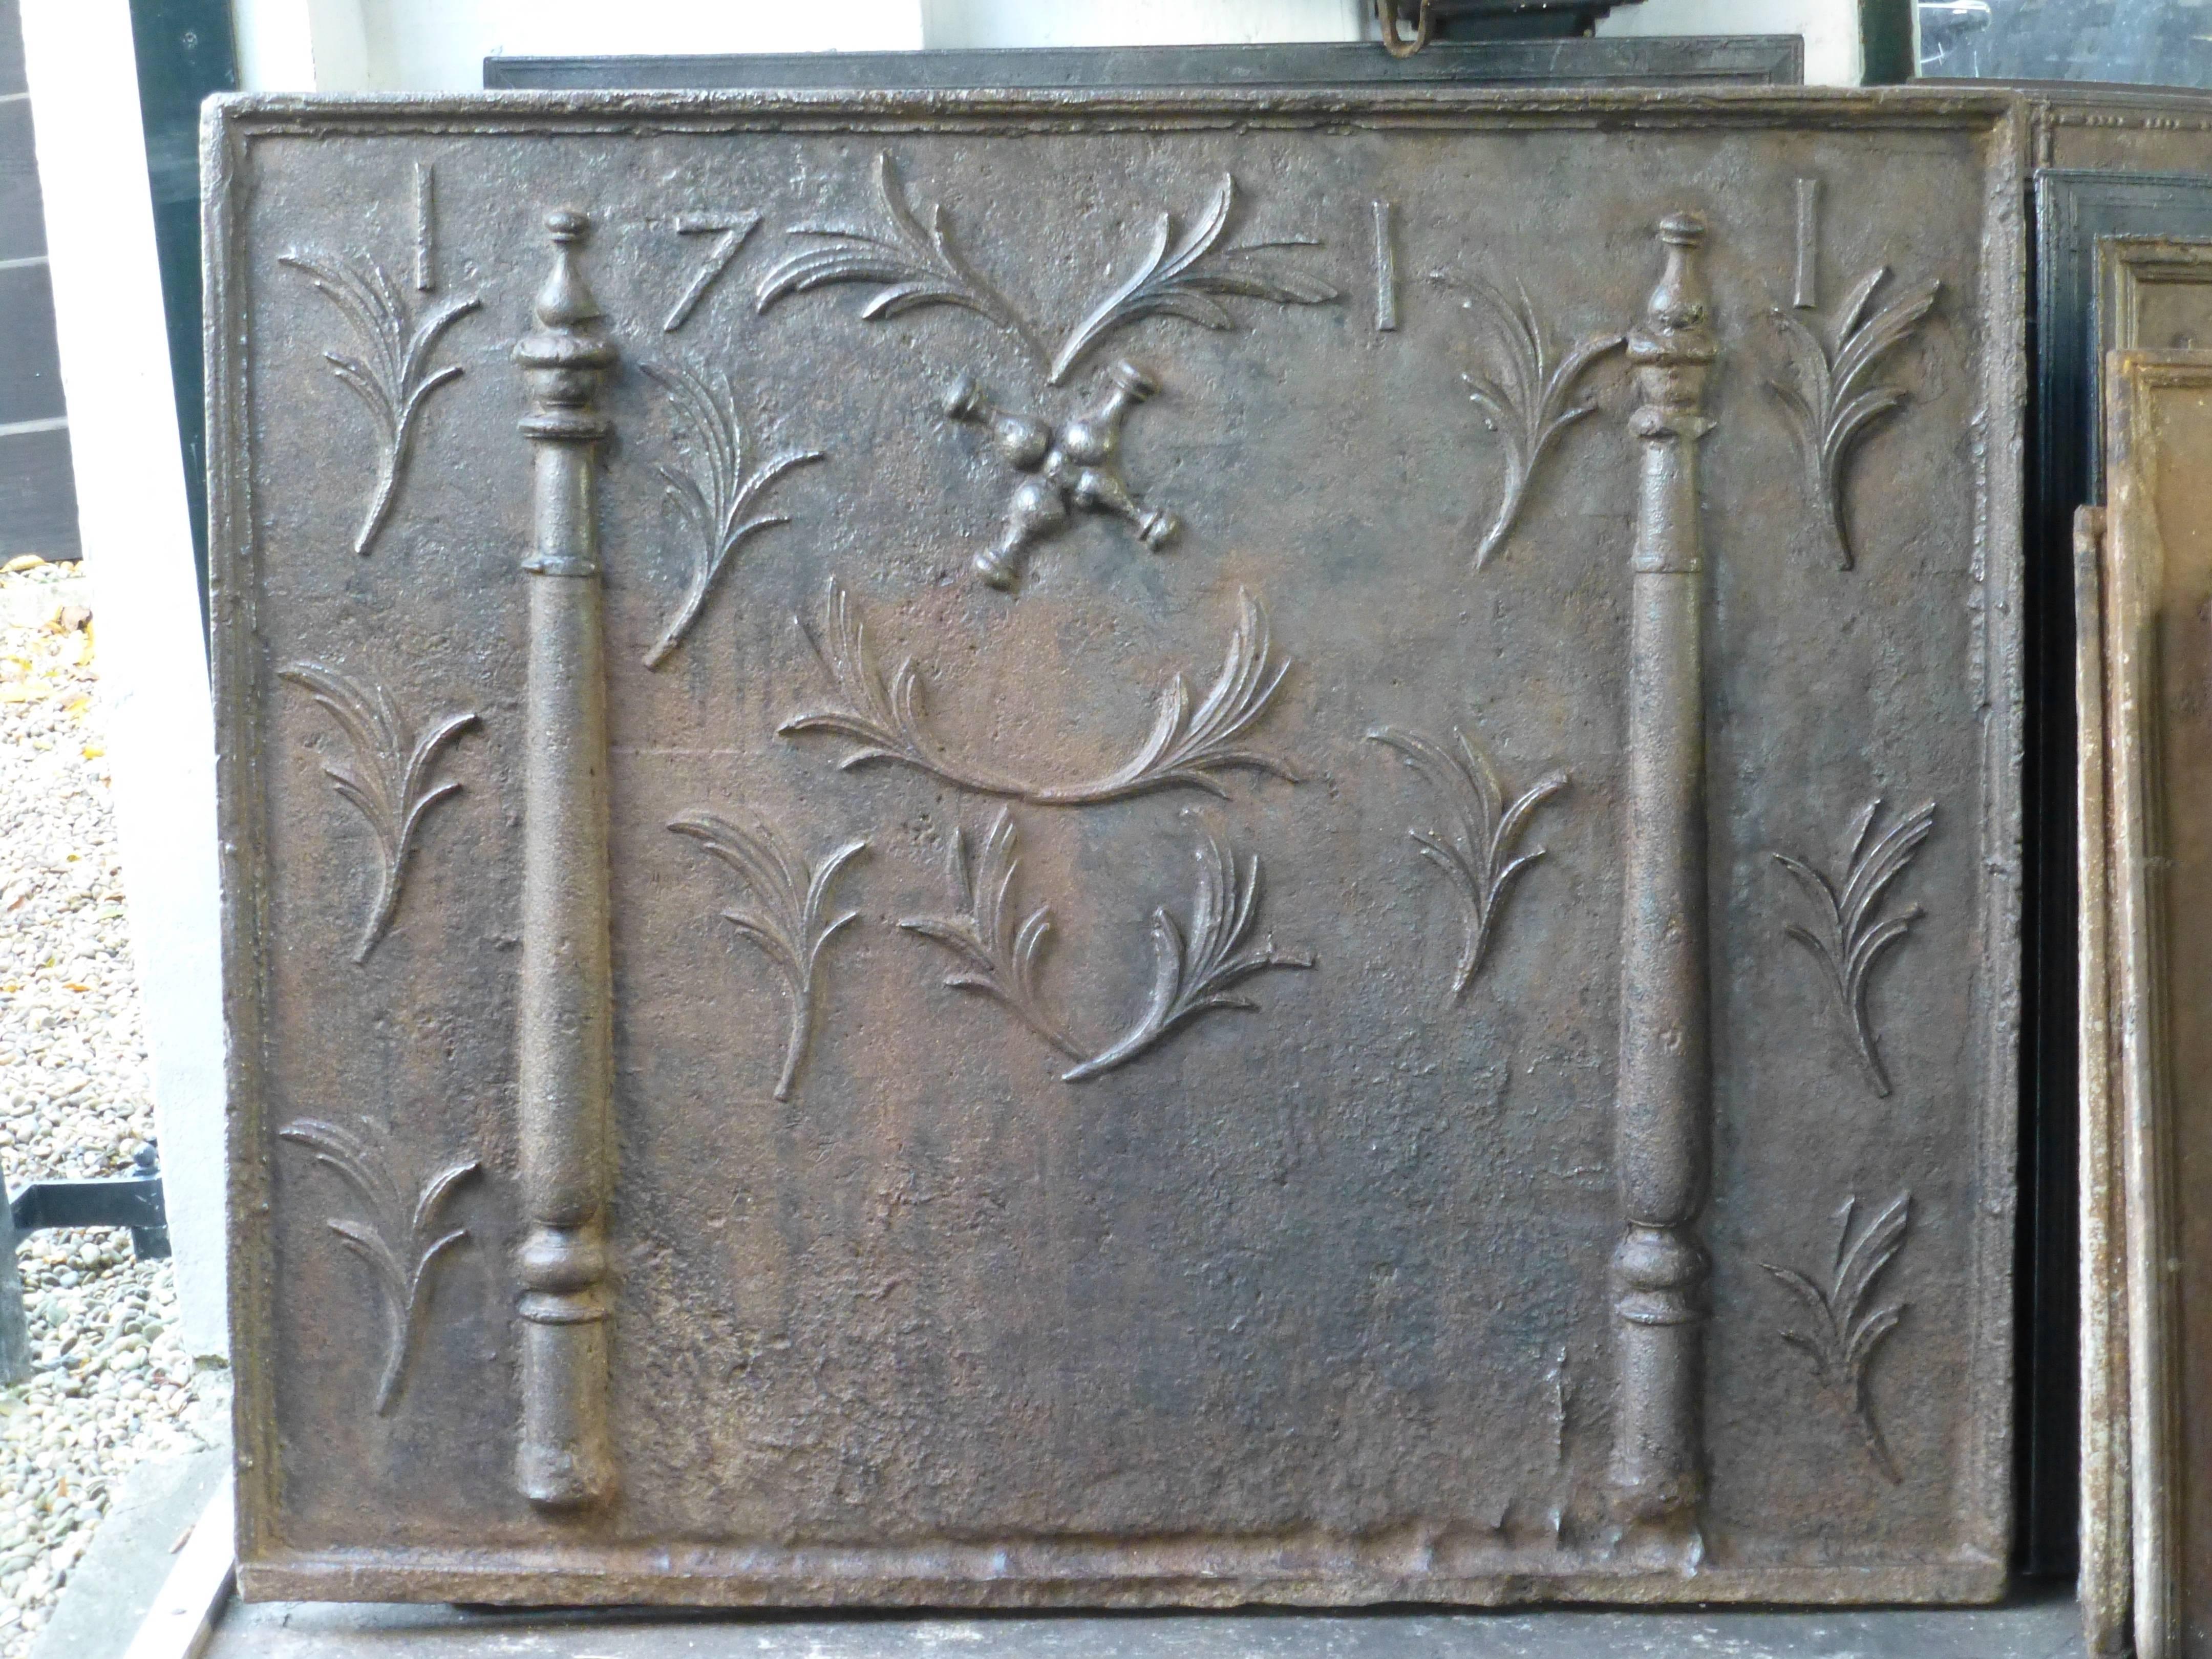 18th century French fireback with pillars, Saint Adrew's Cross, leaves and the date of production 1711.